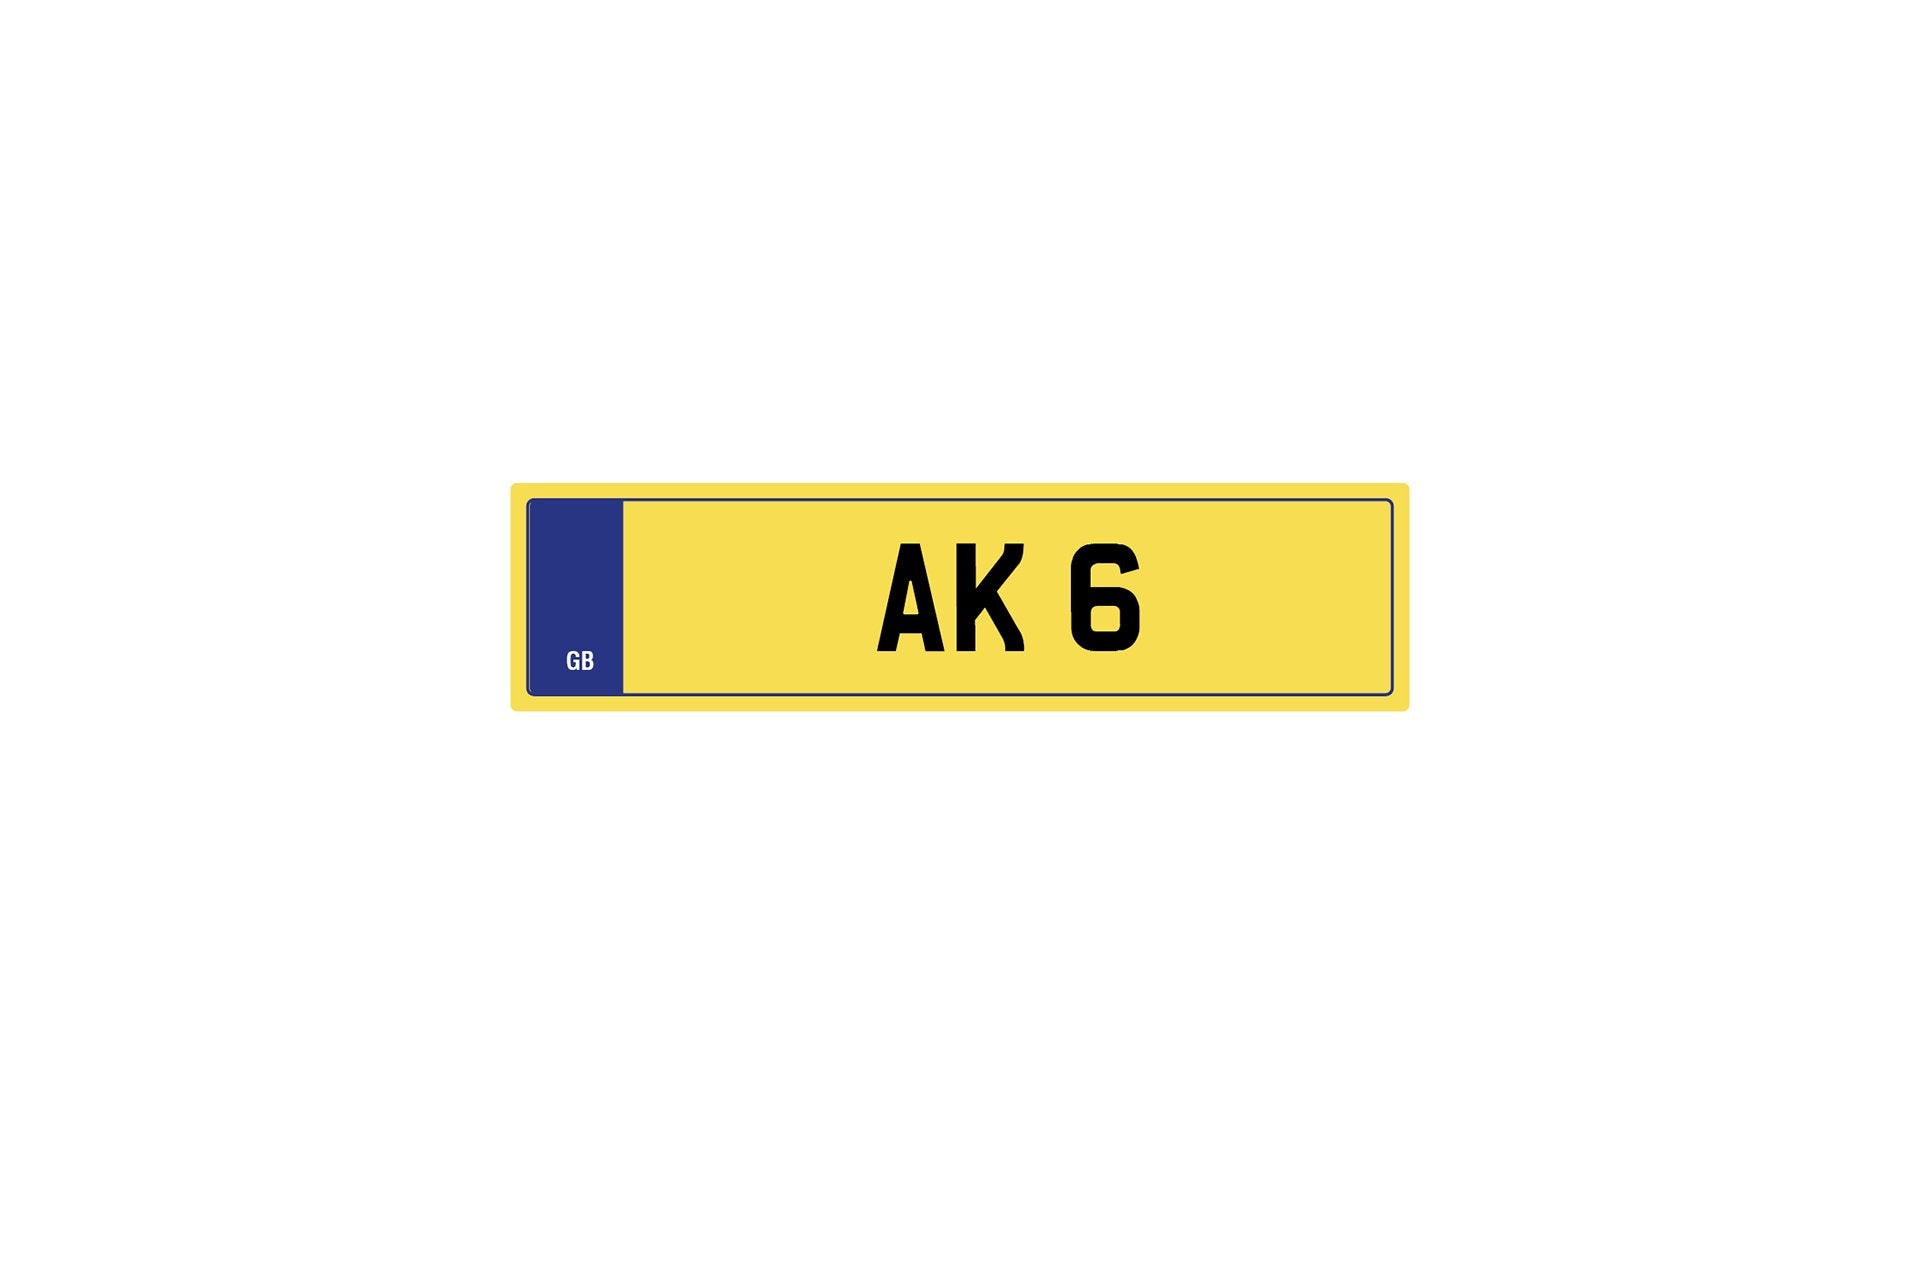 Private Plate Ak 6 by Project Kahn - Image 285